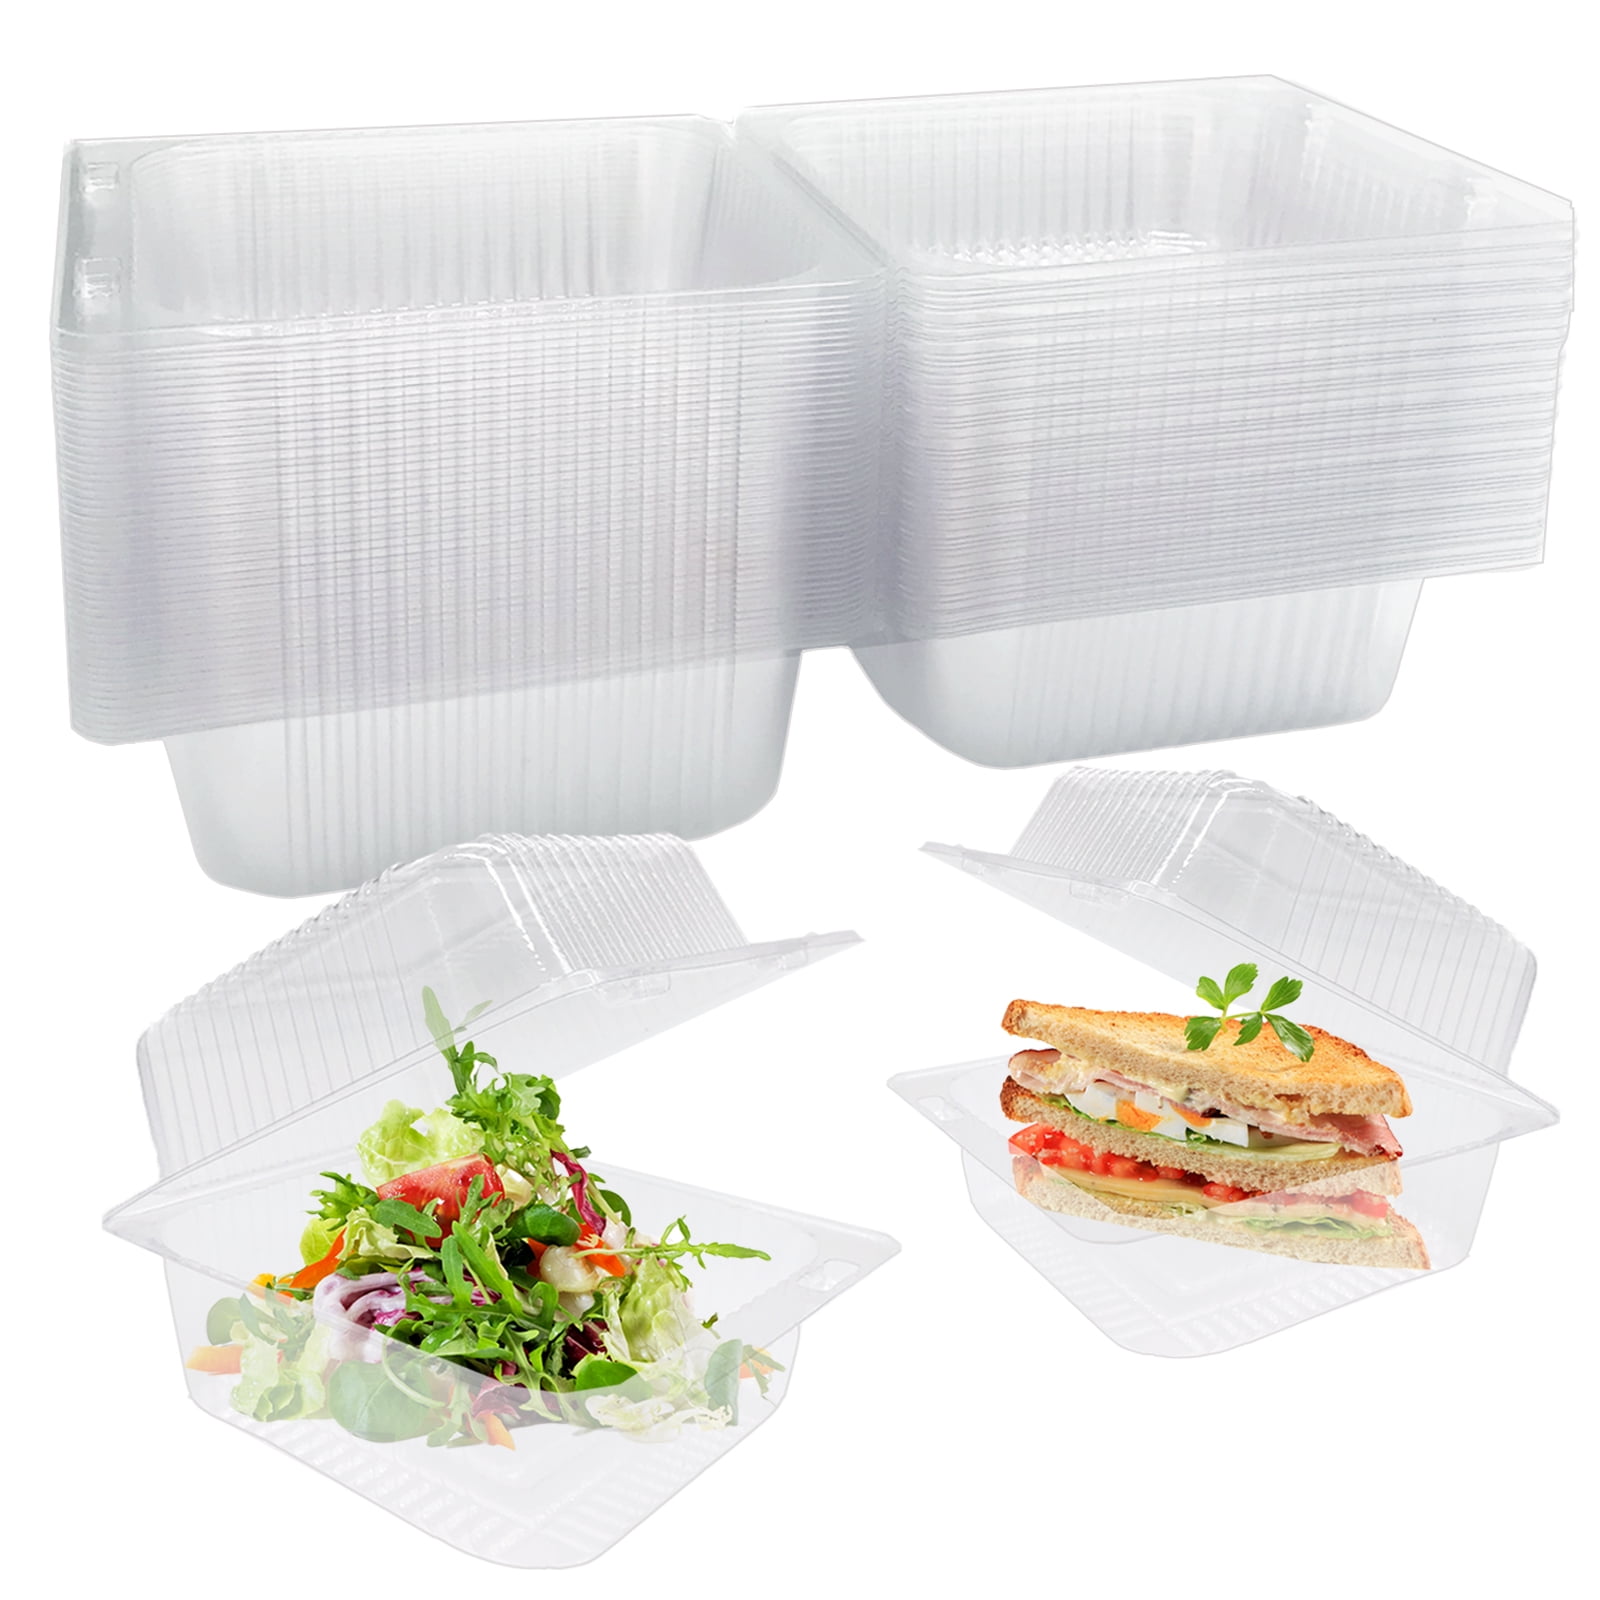 WAQIAGO 150 PCS 5x5 Inch Plastic Clamshell Take Out Tray,Disposable Sturdy  Hinged LoafContainers,to go containers Disposable Takeout Box for